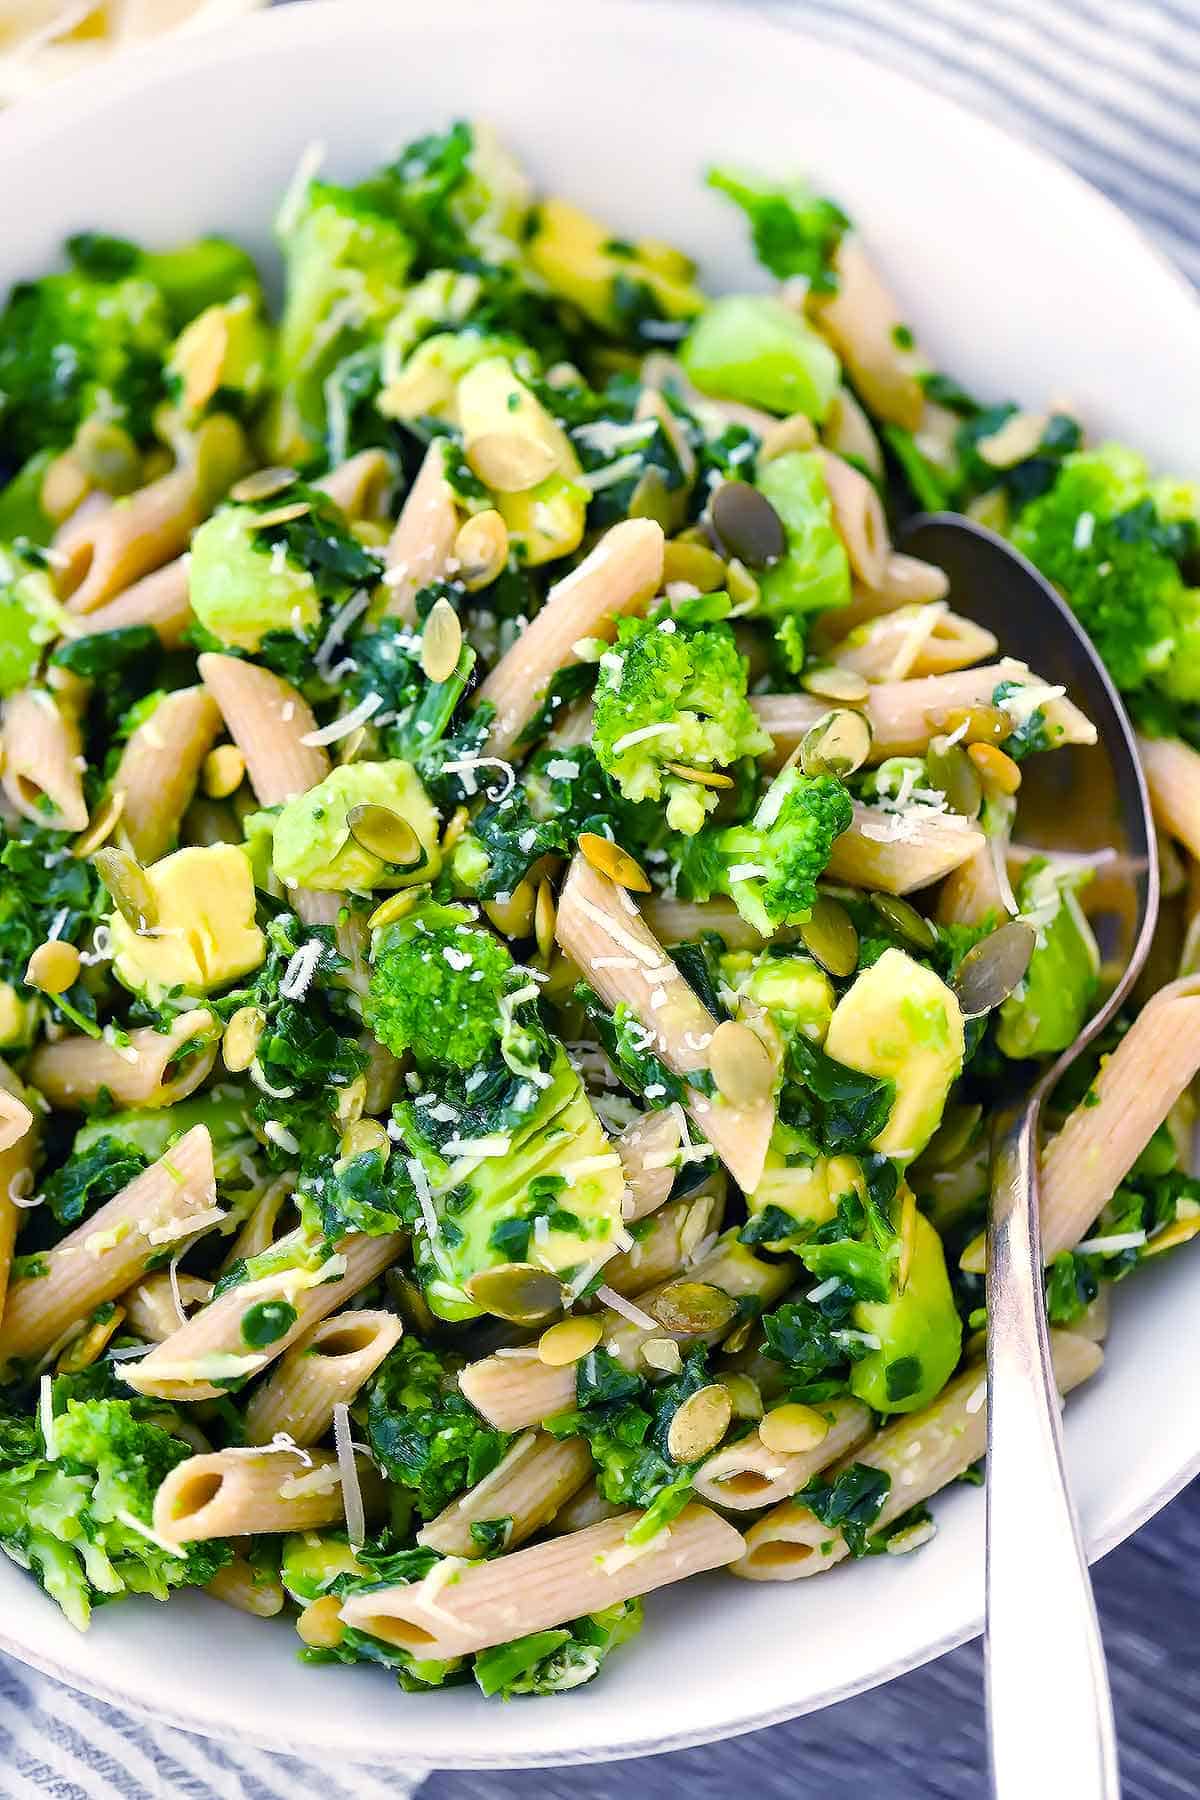 A close up photo of green goddess pasta salad with broccoli and avocado with a spoon.